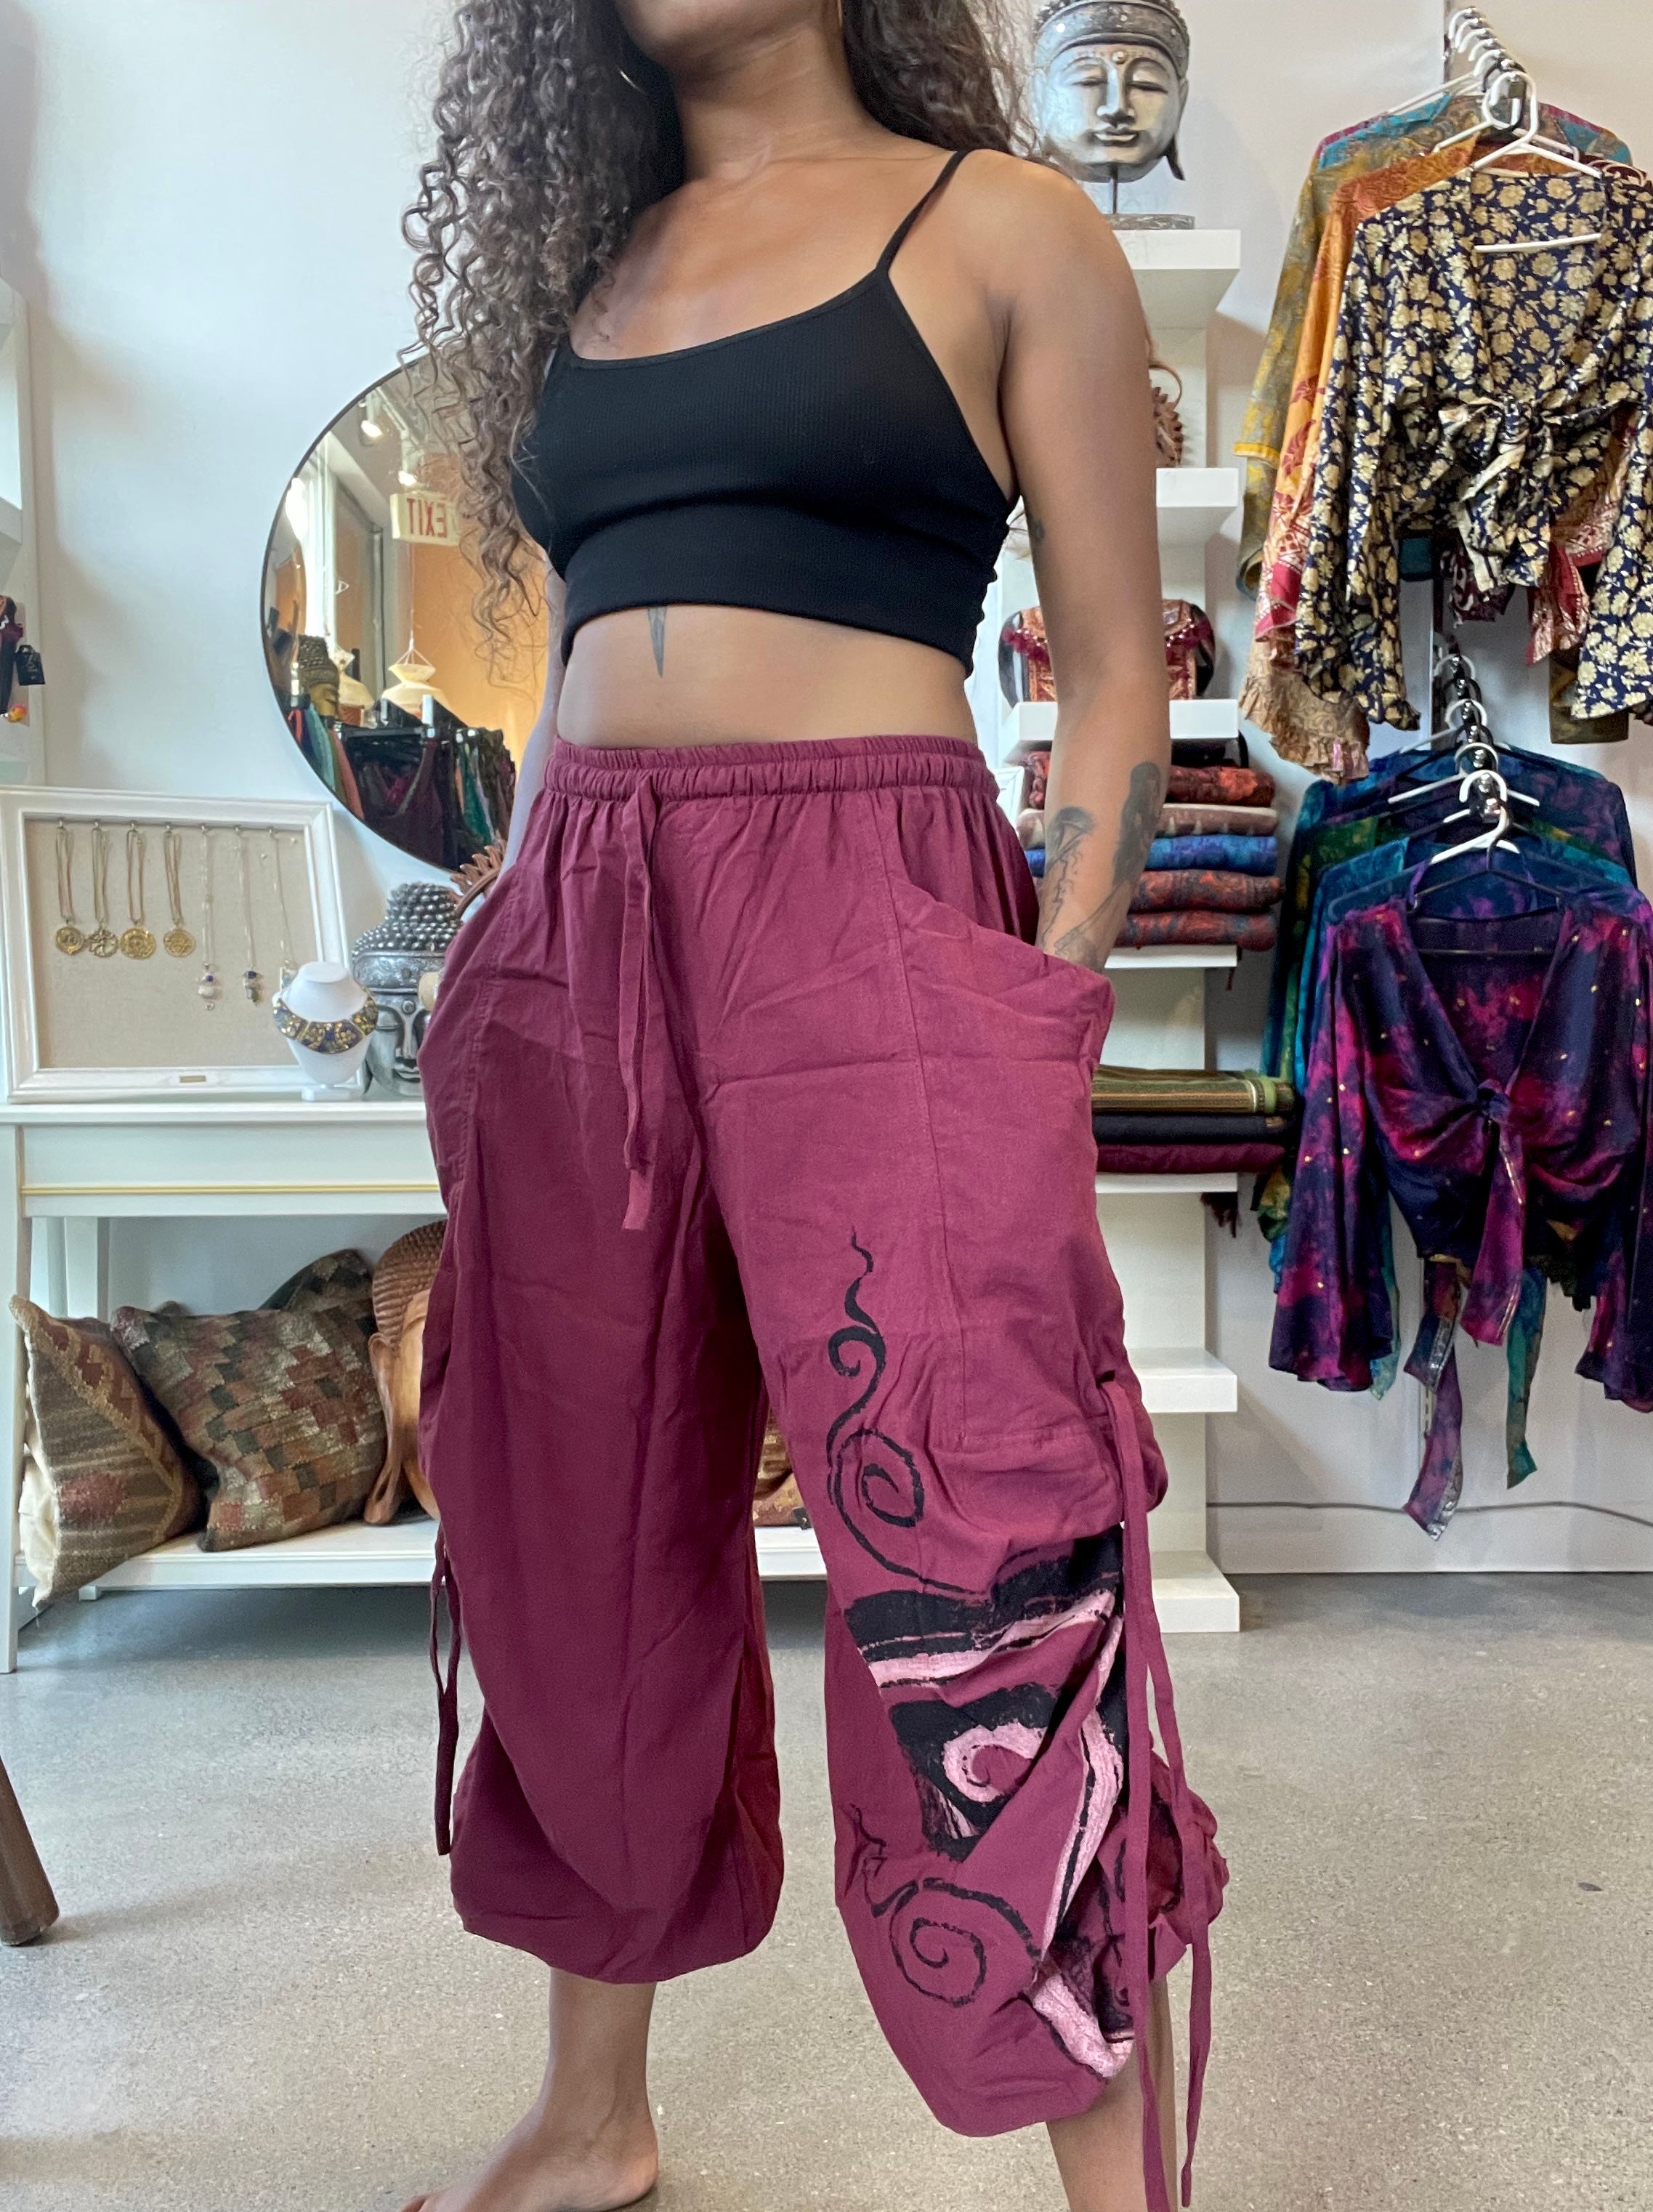 Lighten up your wardrobe with harem pants: Our guide on how to wear ha